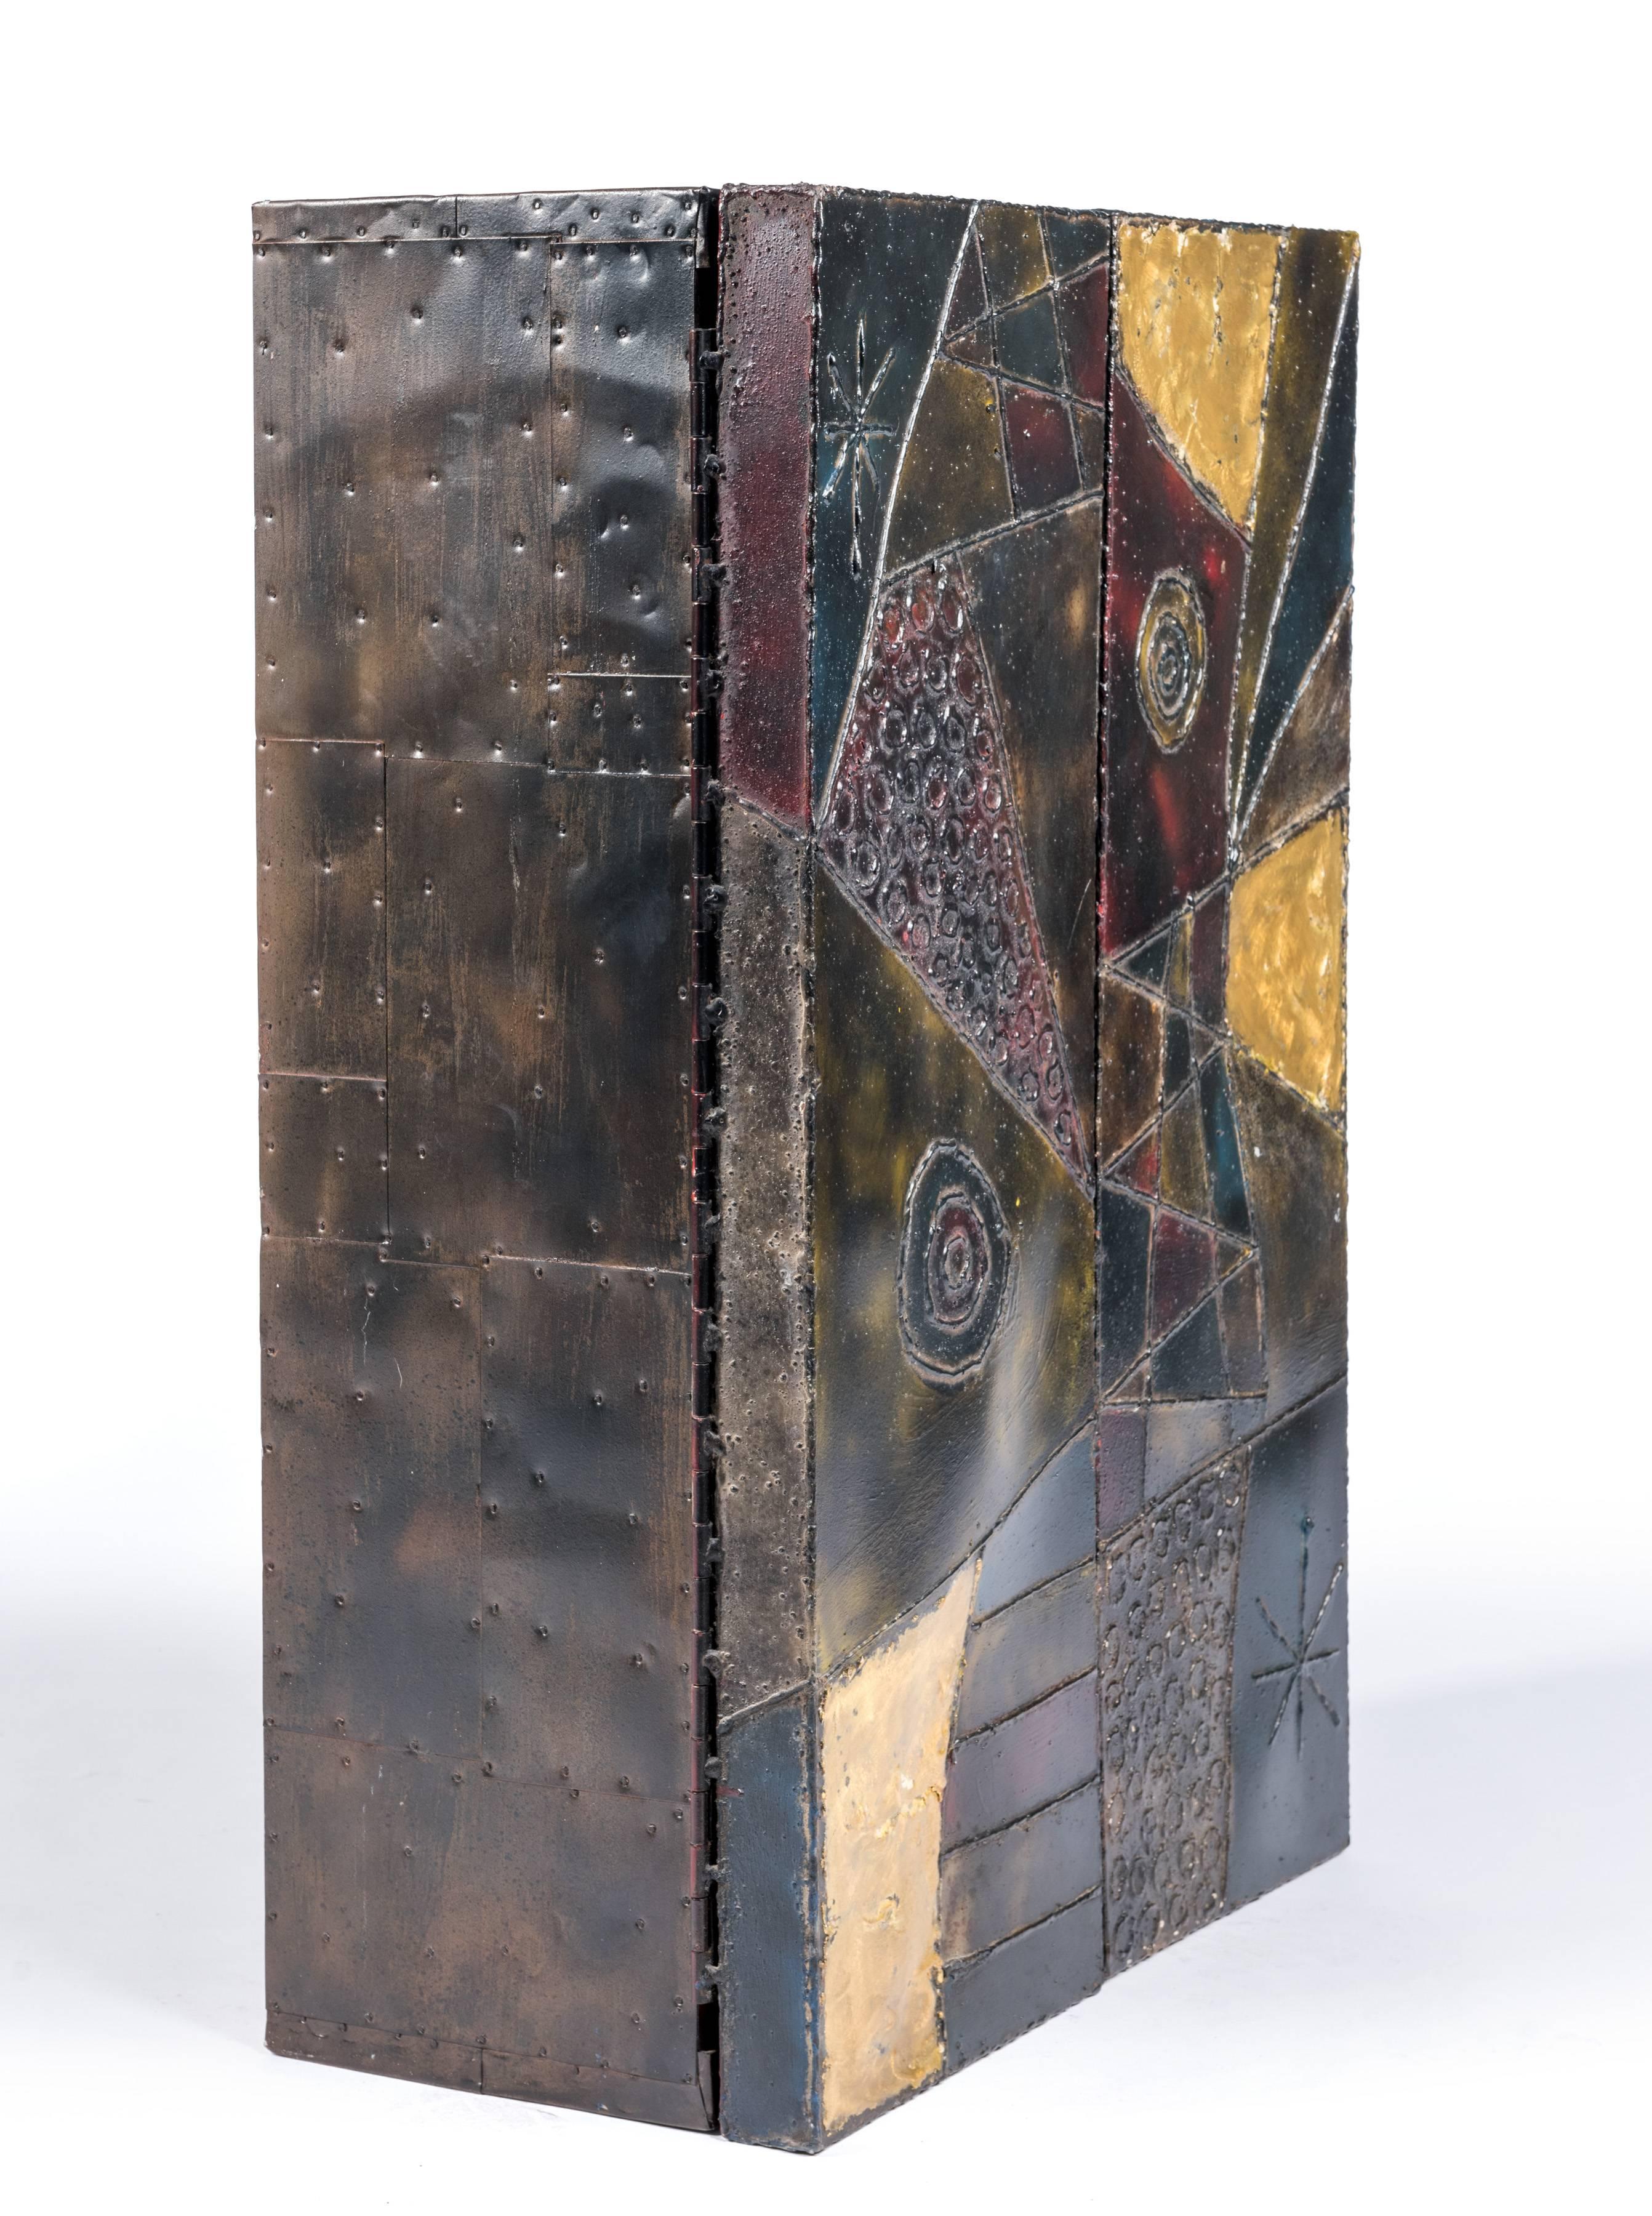 Sculpted steel wall-mounted cabinet by Paul Evans. Cabinet with original color to exterior and interior finished with hand-painted red lacquer and three adjustable shelves. Signed and dated 